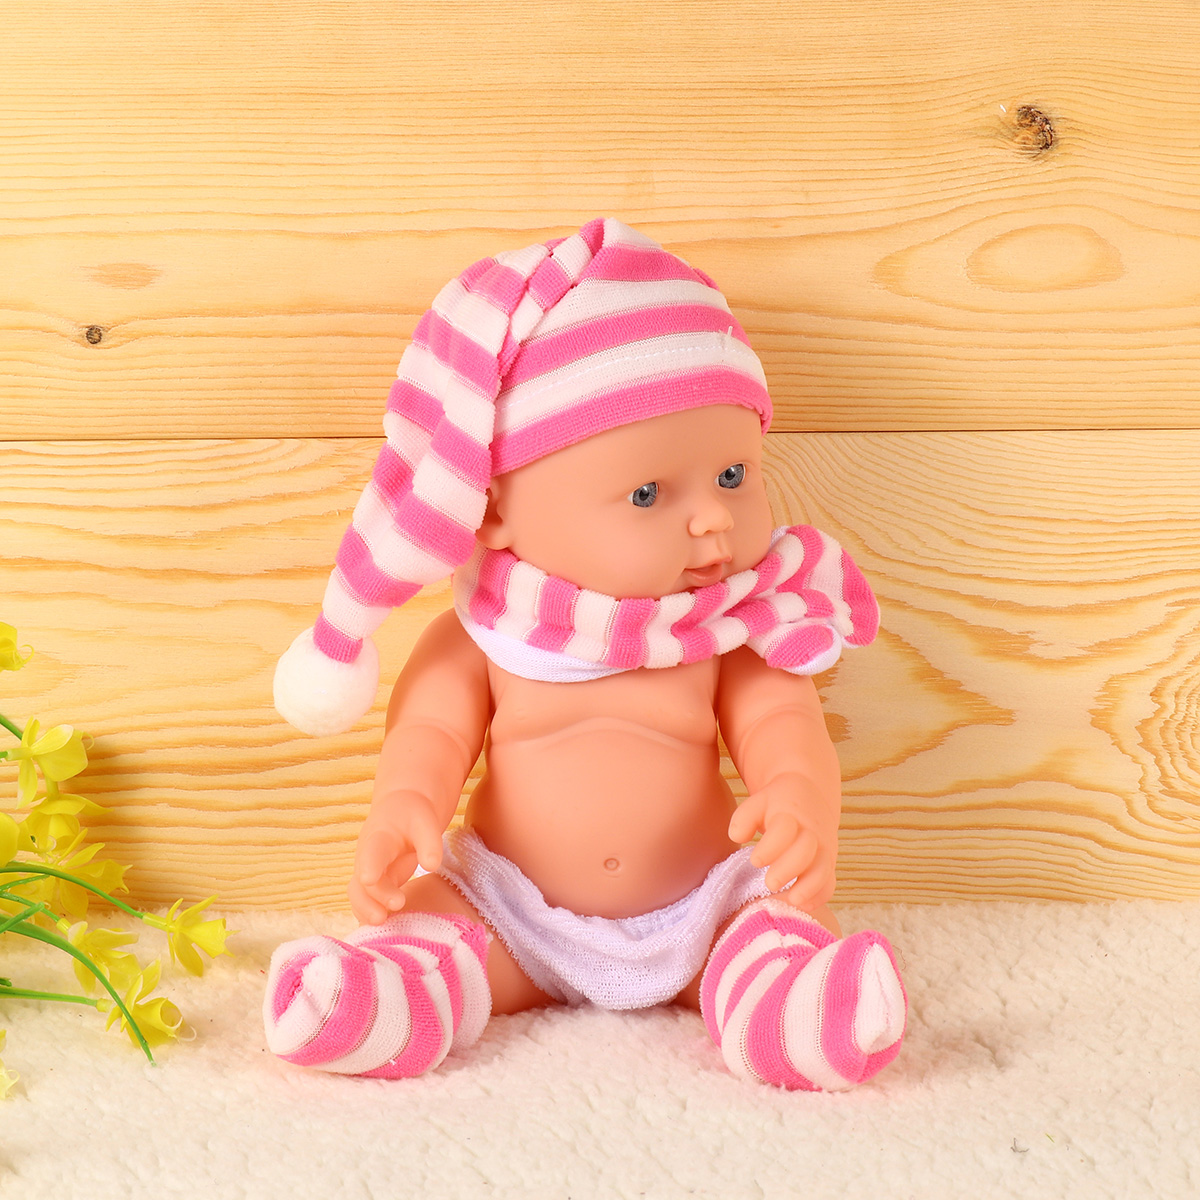 30CM-Height-Simulation-Soft-Silicone-Vinyl-Joint-Removable-Washable-Reborn-Baby-Doll-Toy-for-Kids-Bi-1812138-9